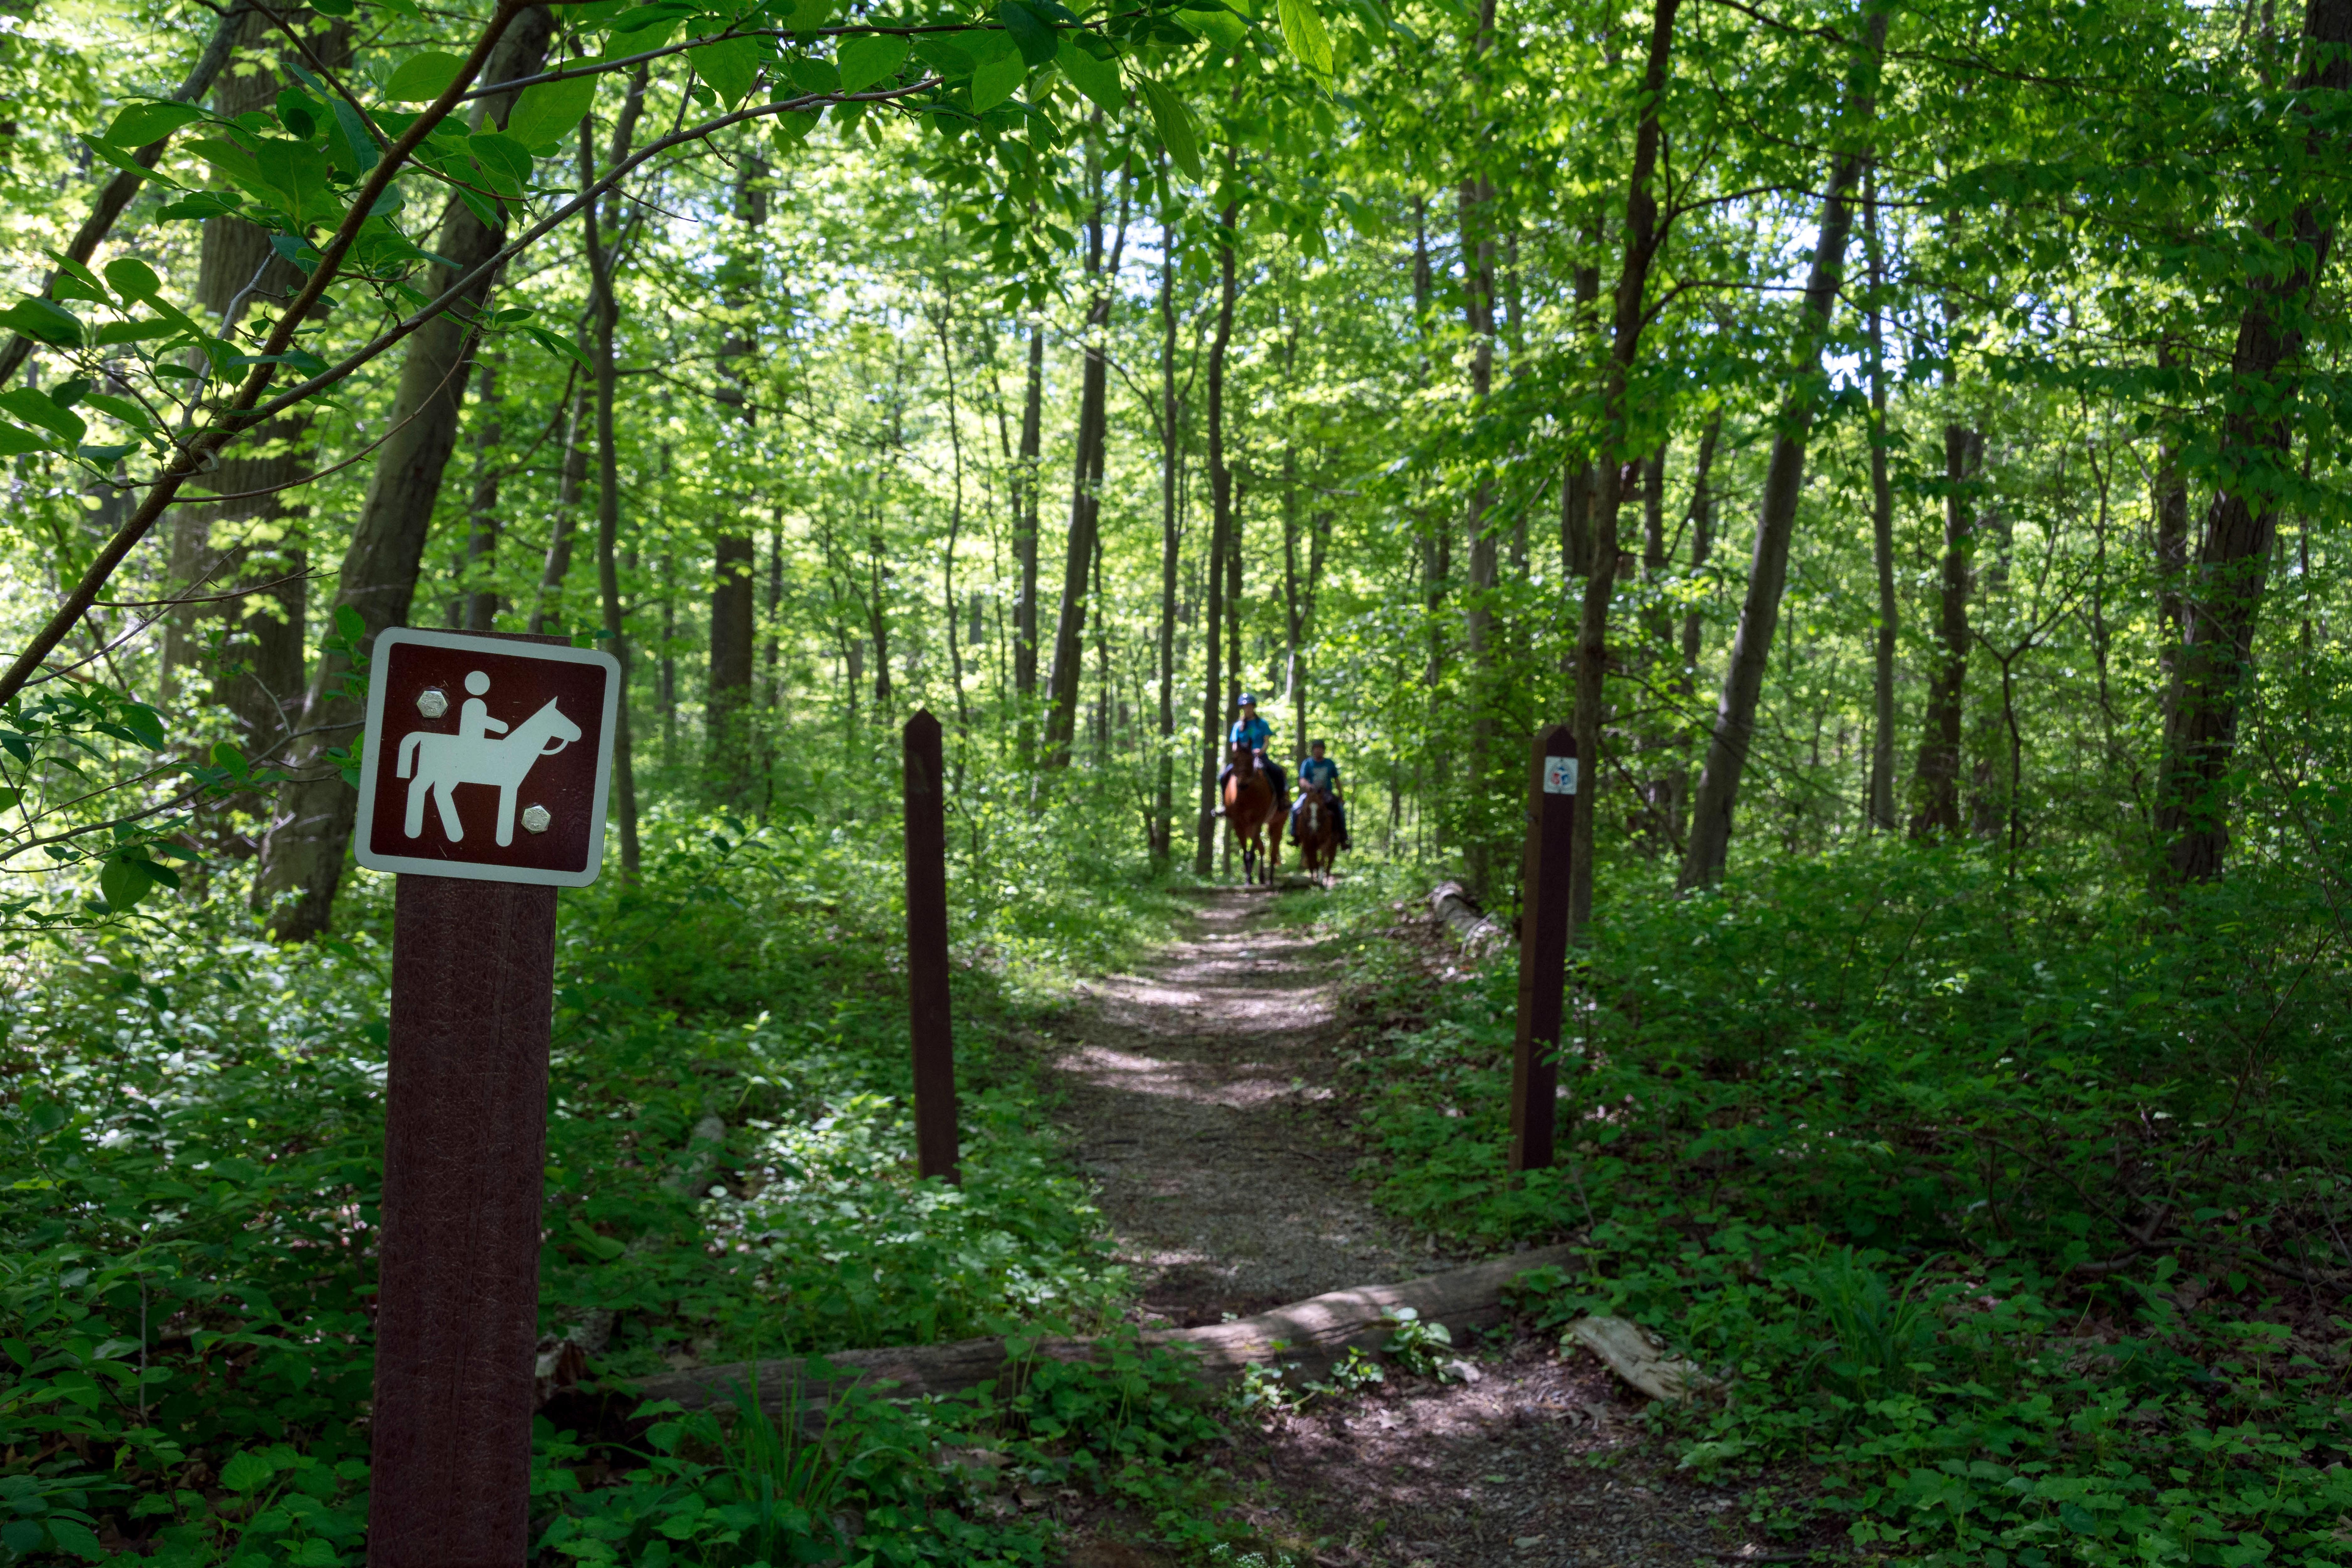 The Horse Trail